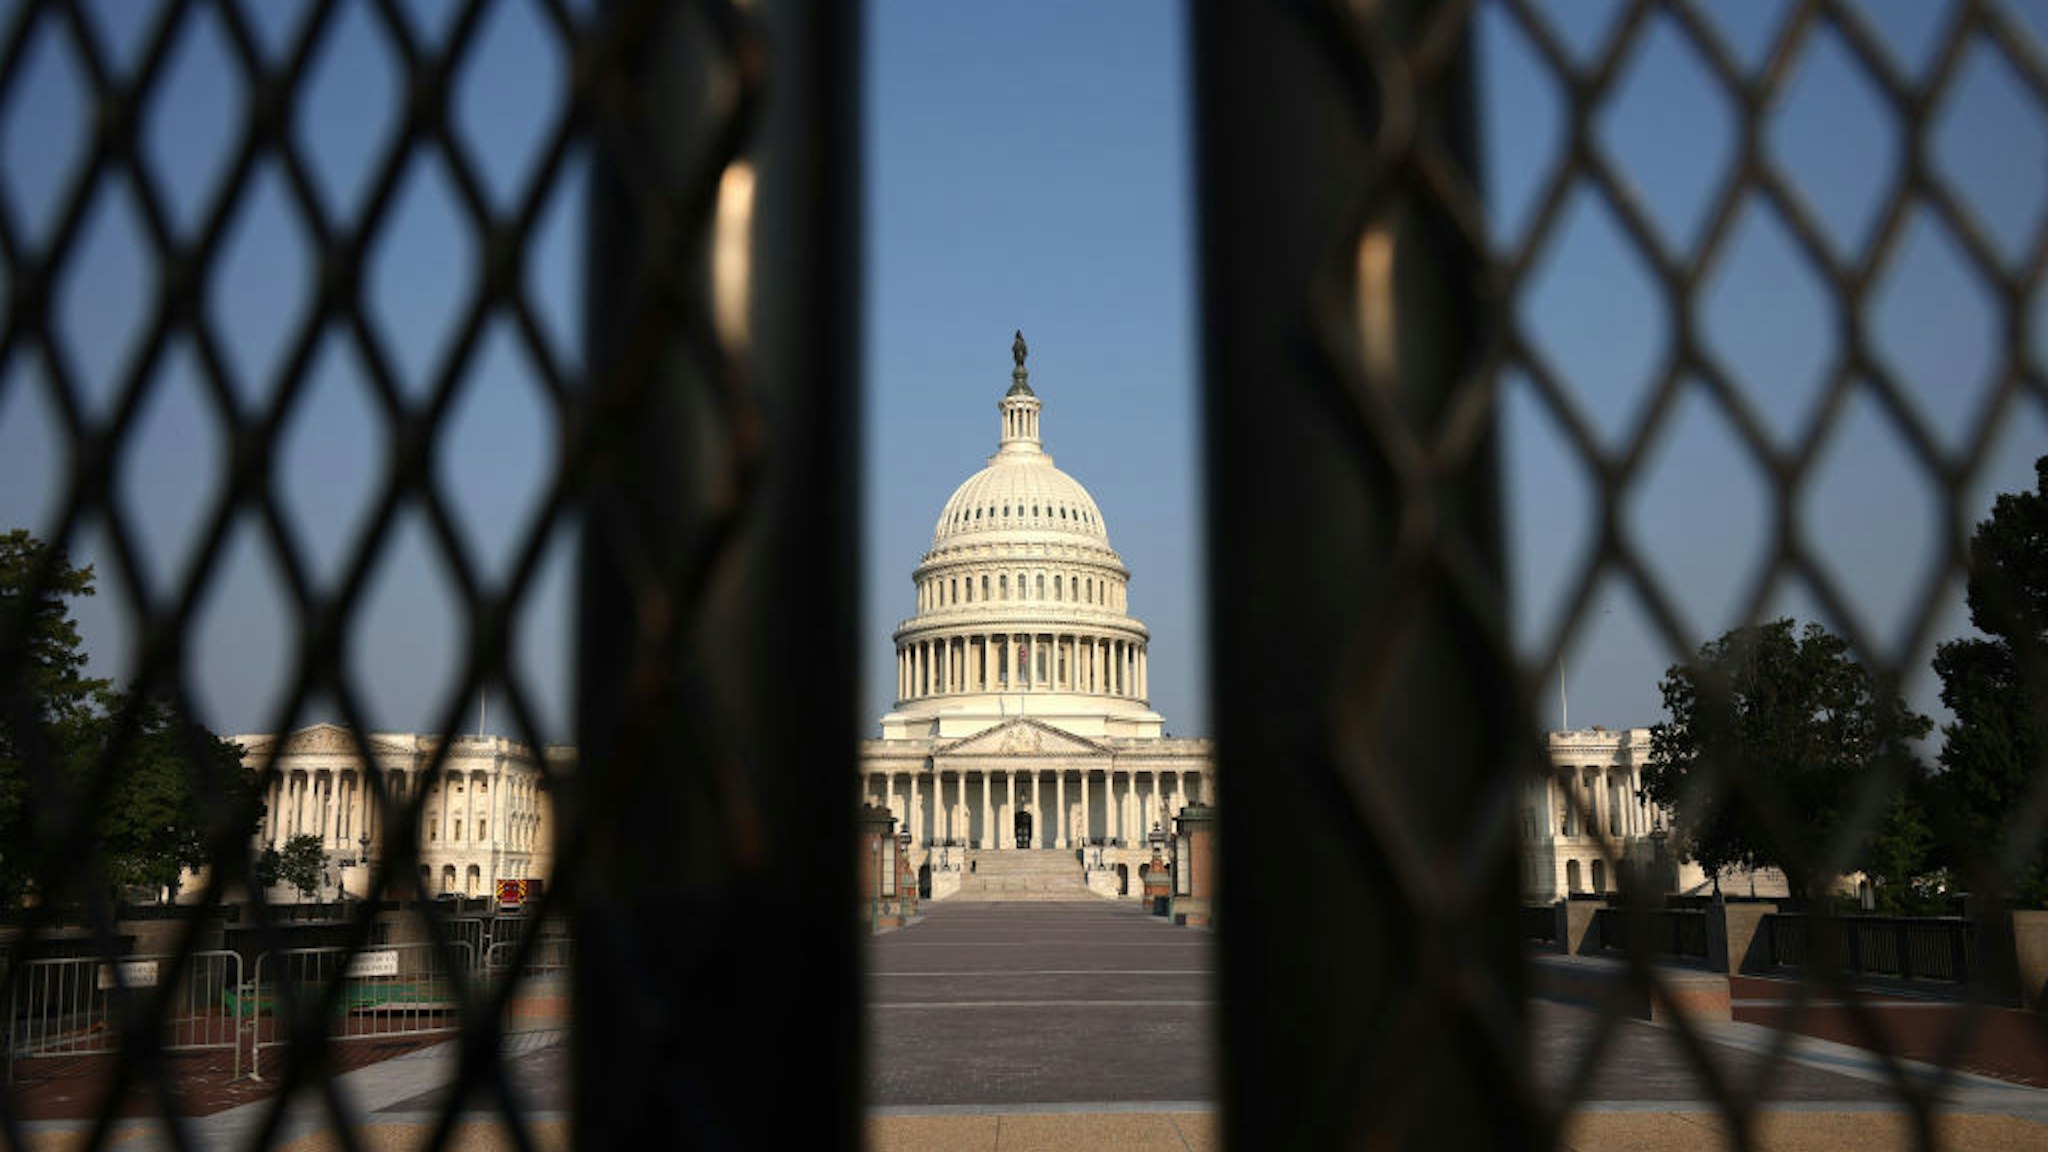 The U.S. Capitol is seen behind security fencing on July 06, 2021 in Washington, DC.